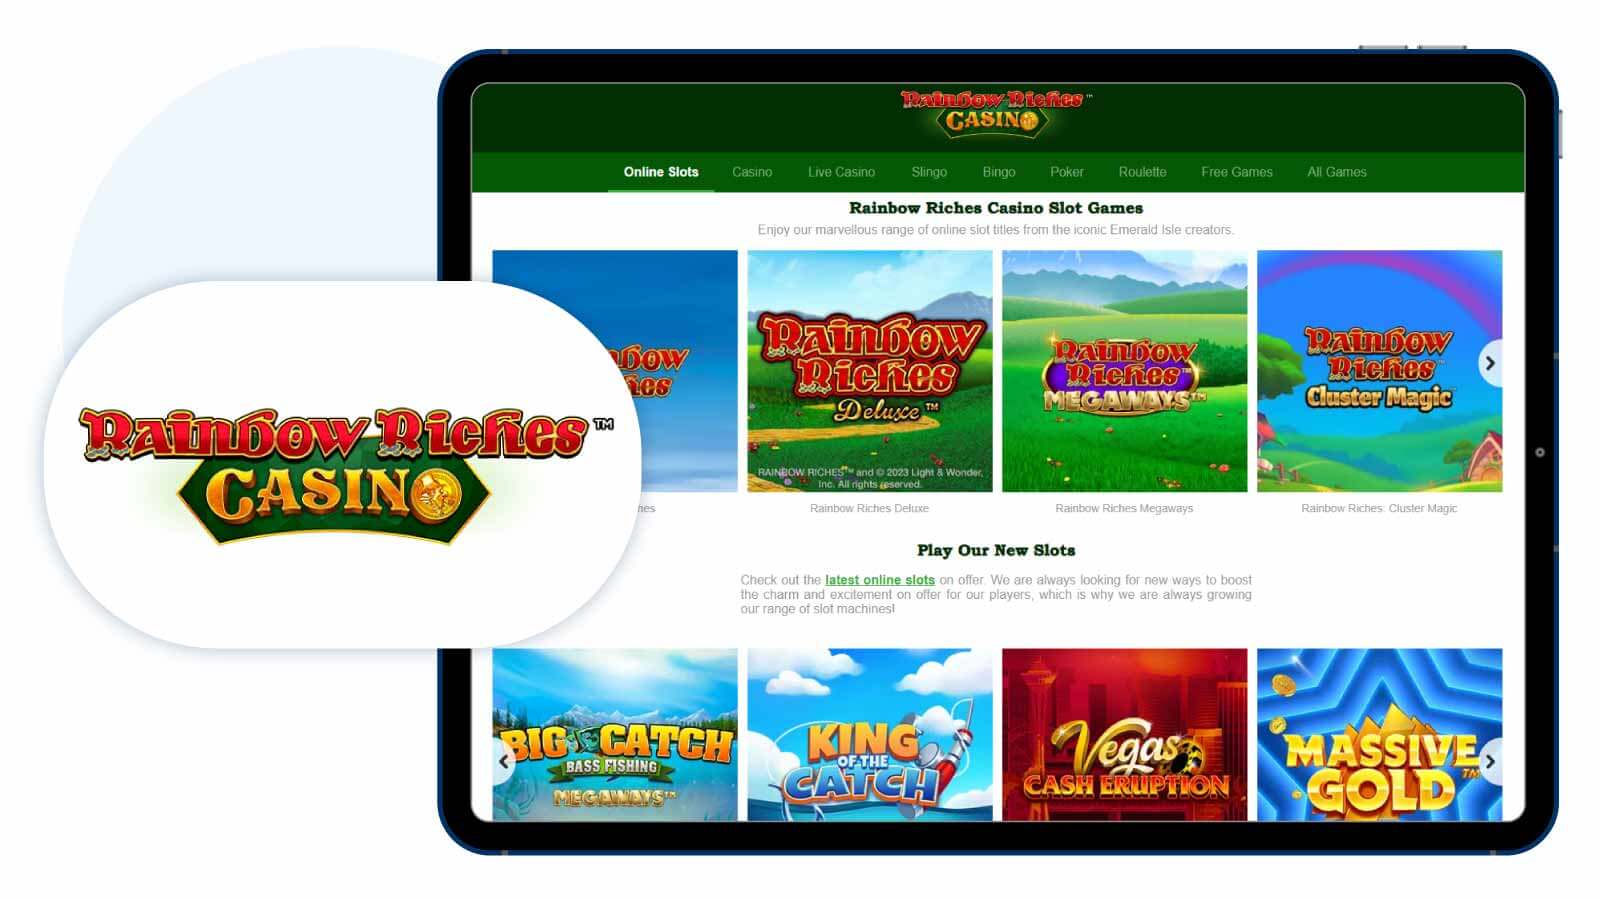 Rainbow Riches Casino – Best for Slot Types